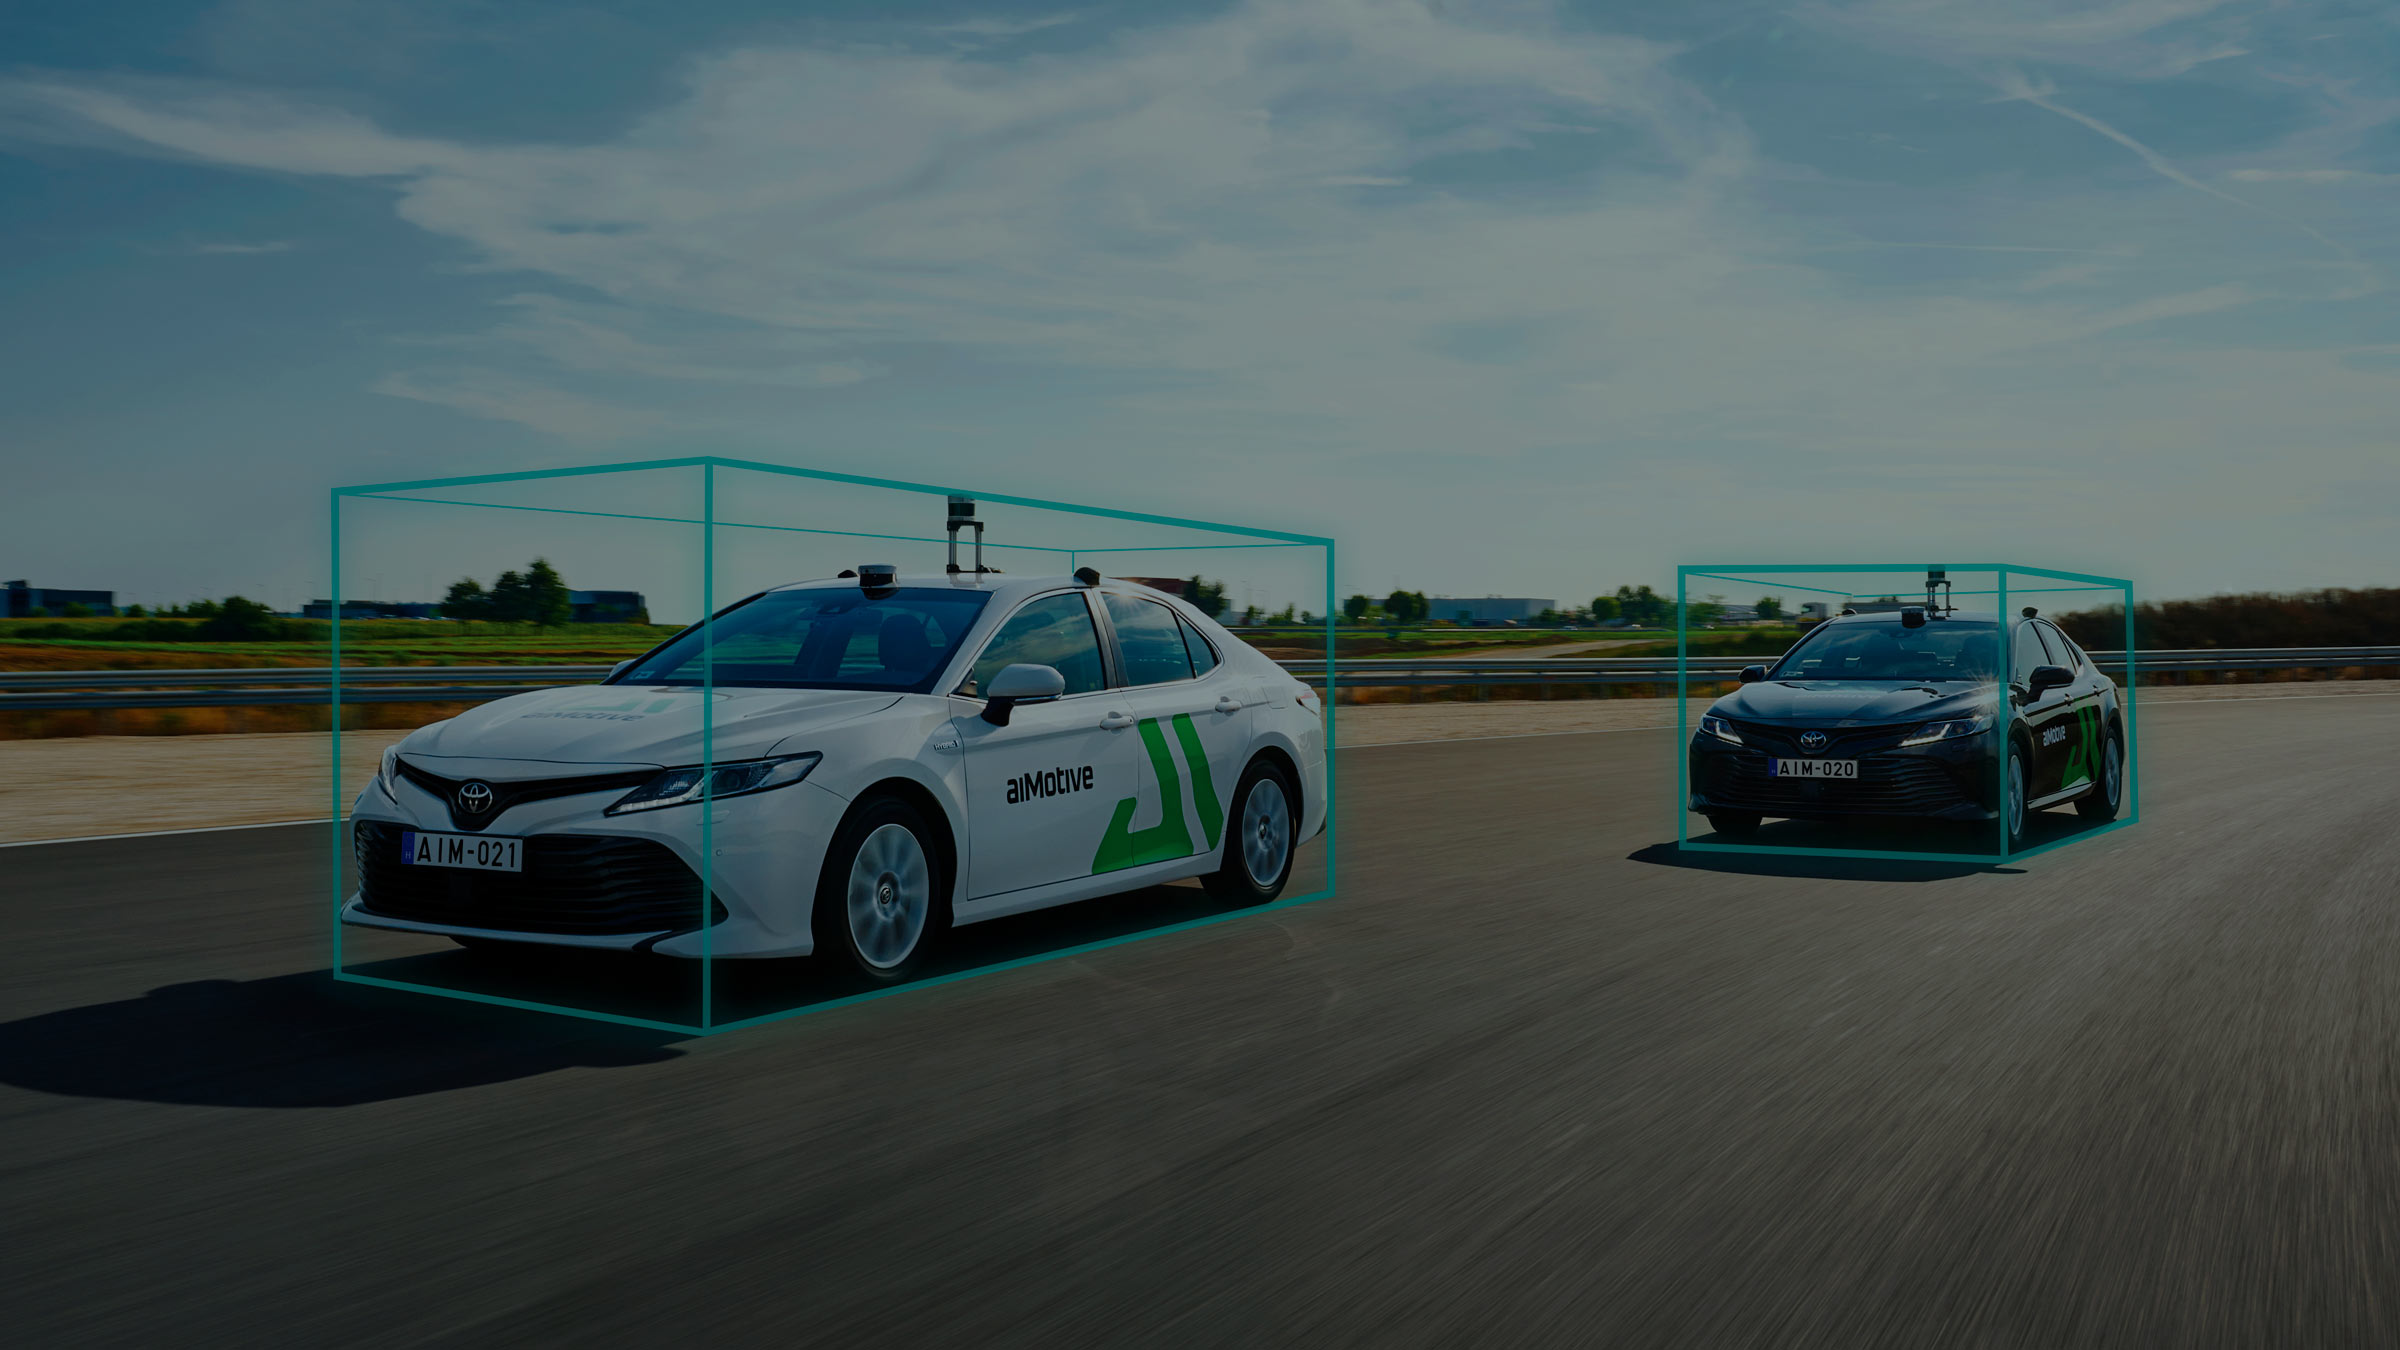 Two automated driving cars developed by aiMotive